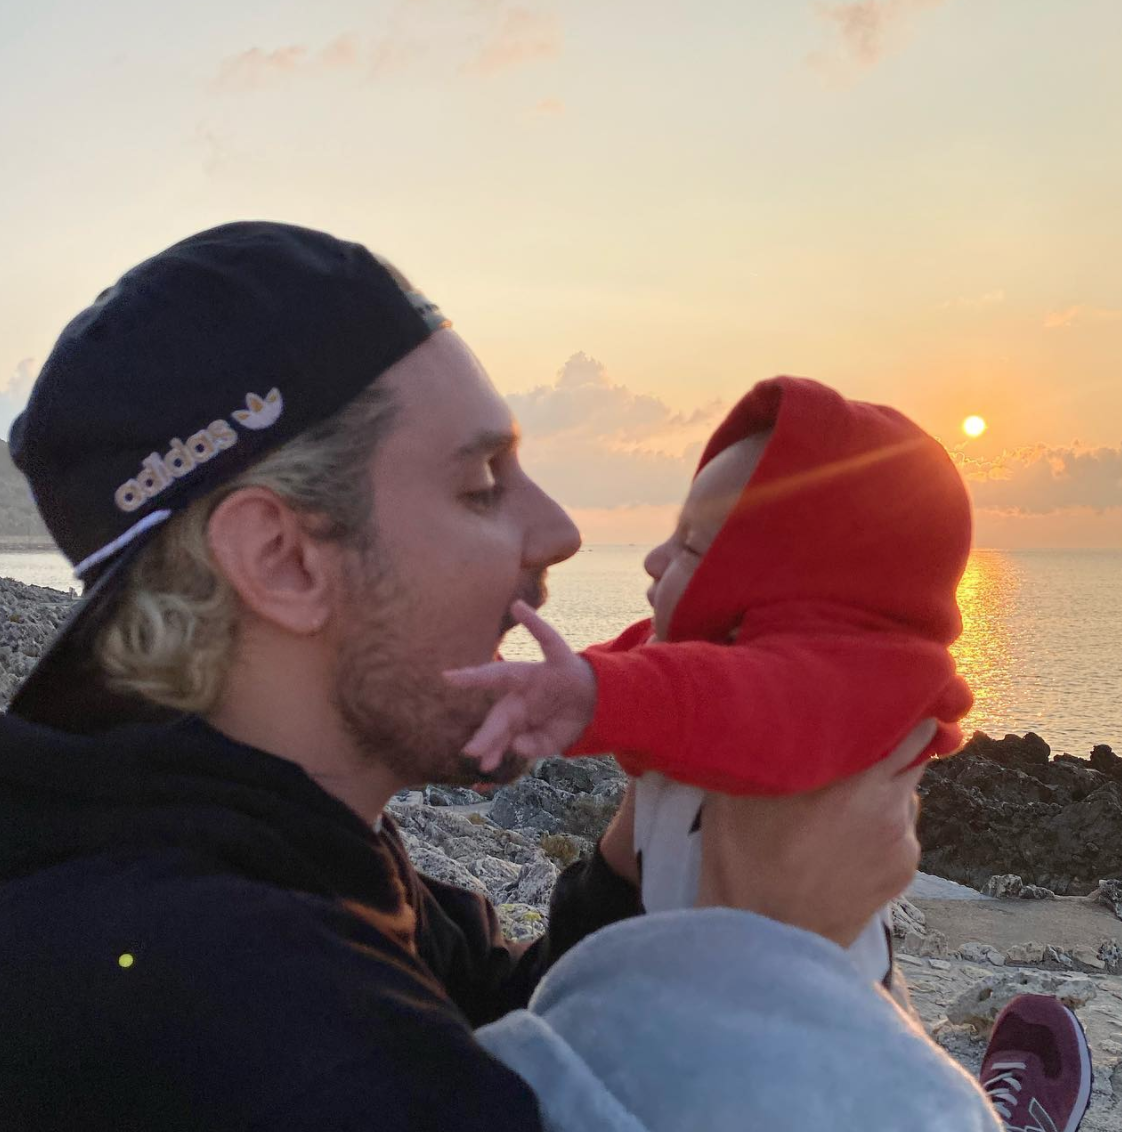 halsey's son is adorable: 10 photos the new parent shared of their baby boy